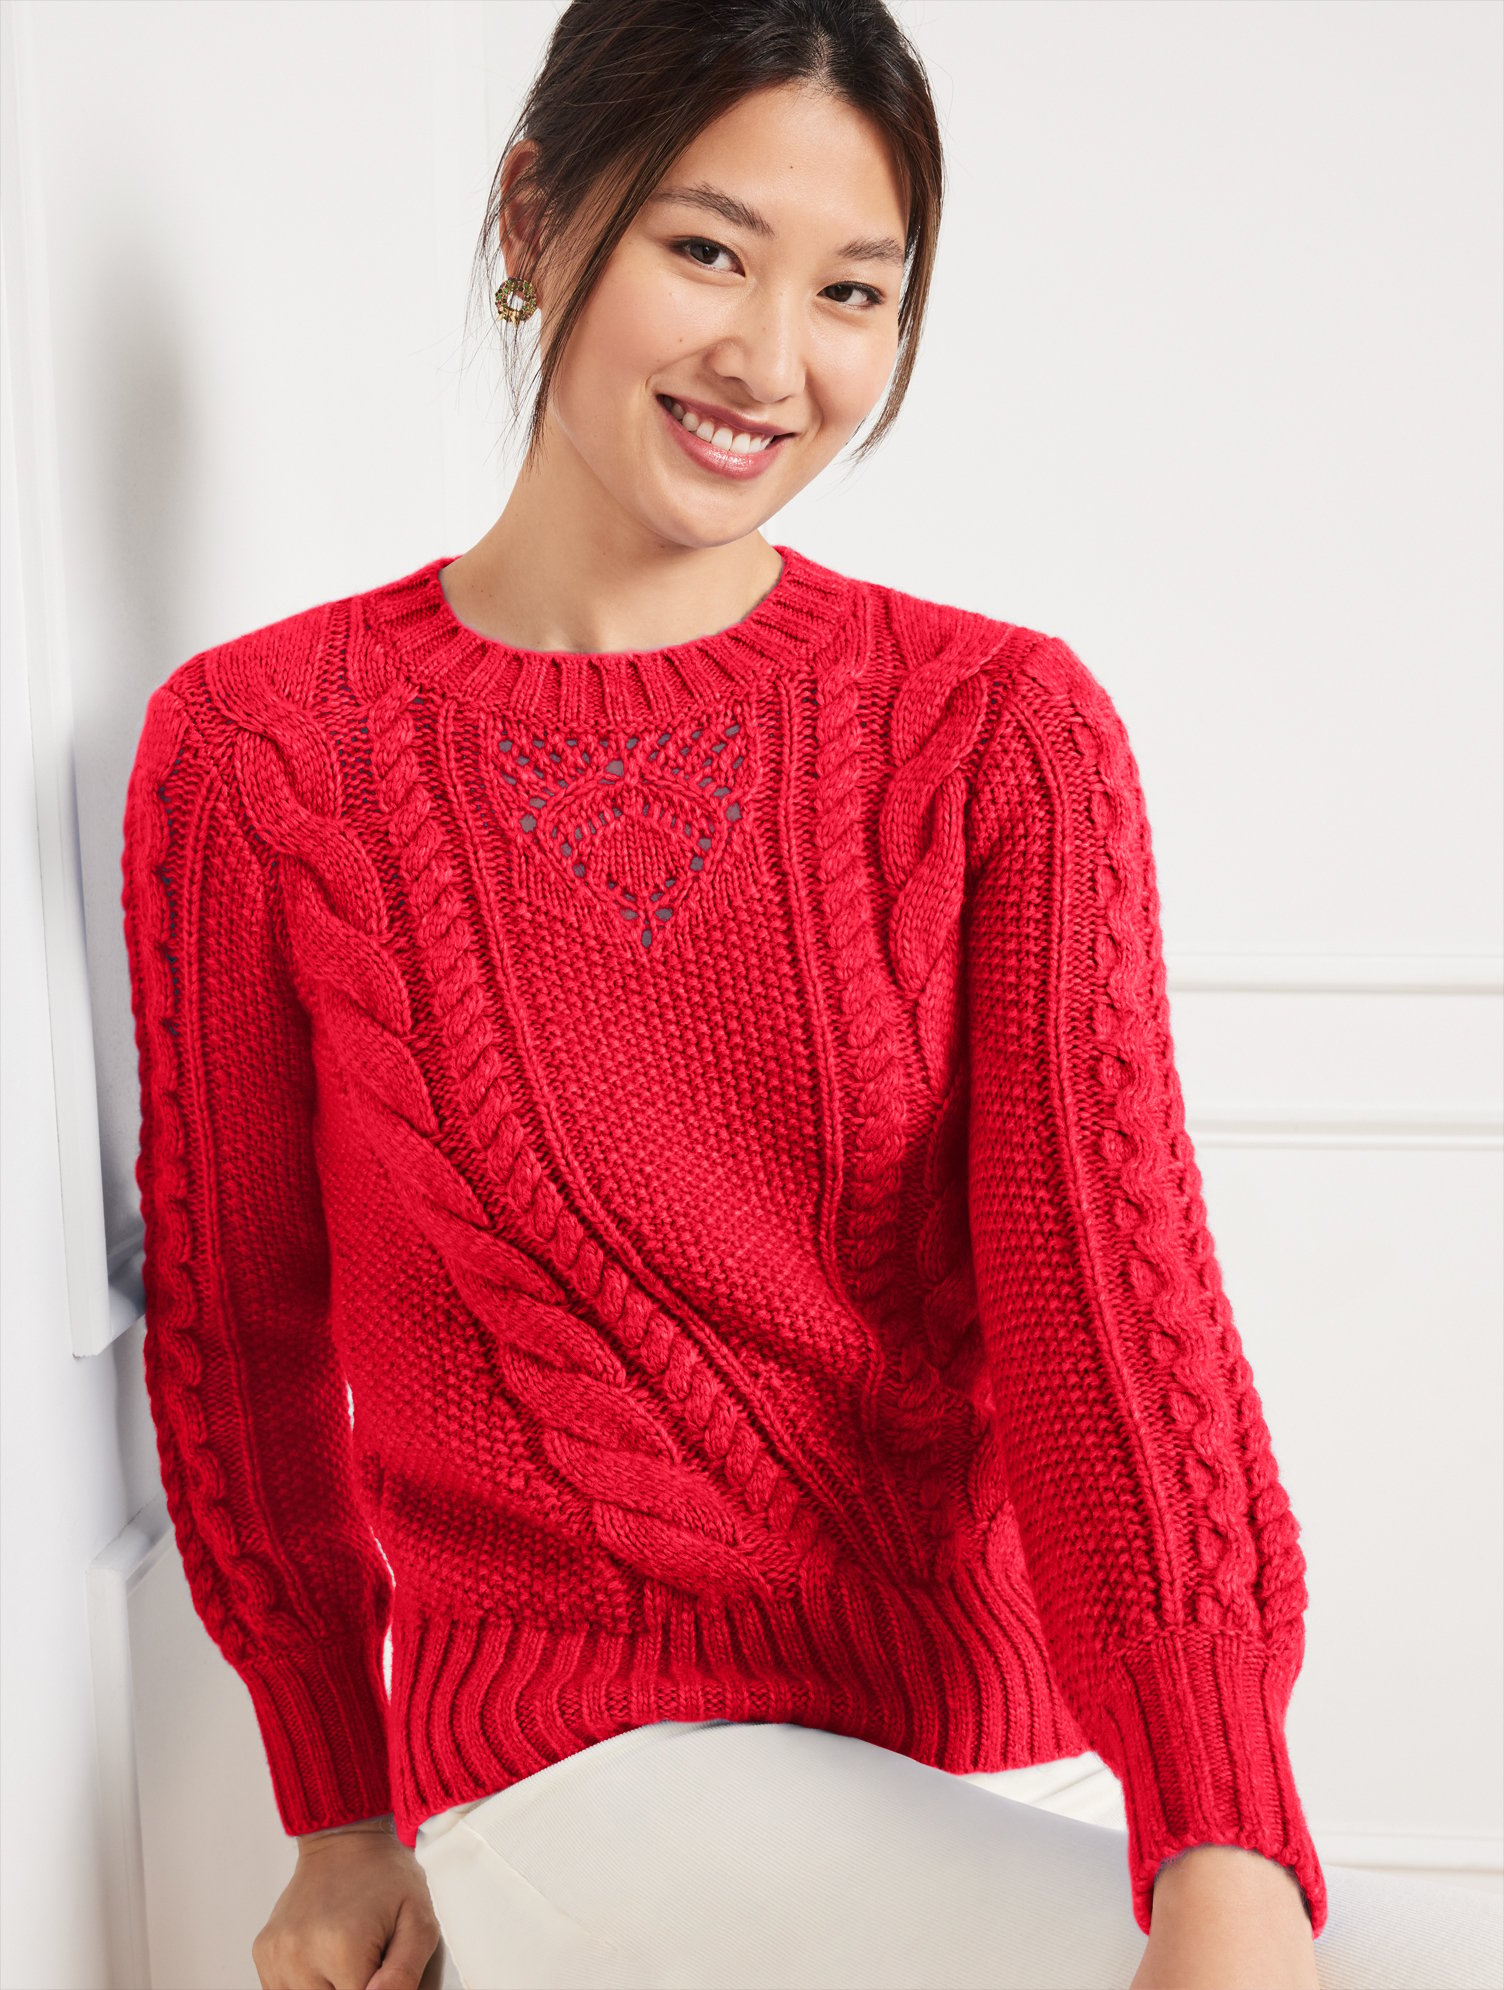 Talbots Balloon Sleeve Cable Knit Sweater - Red - X